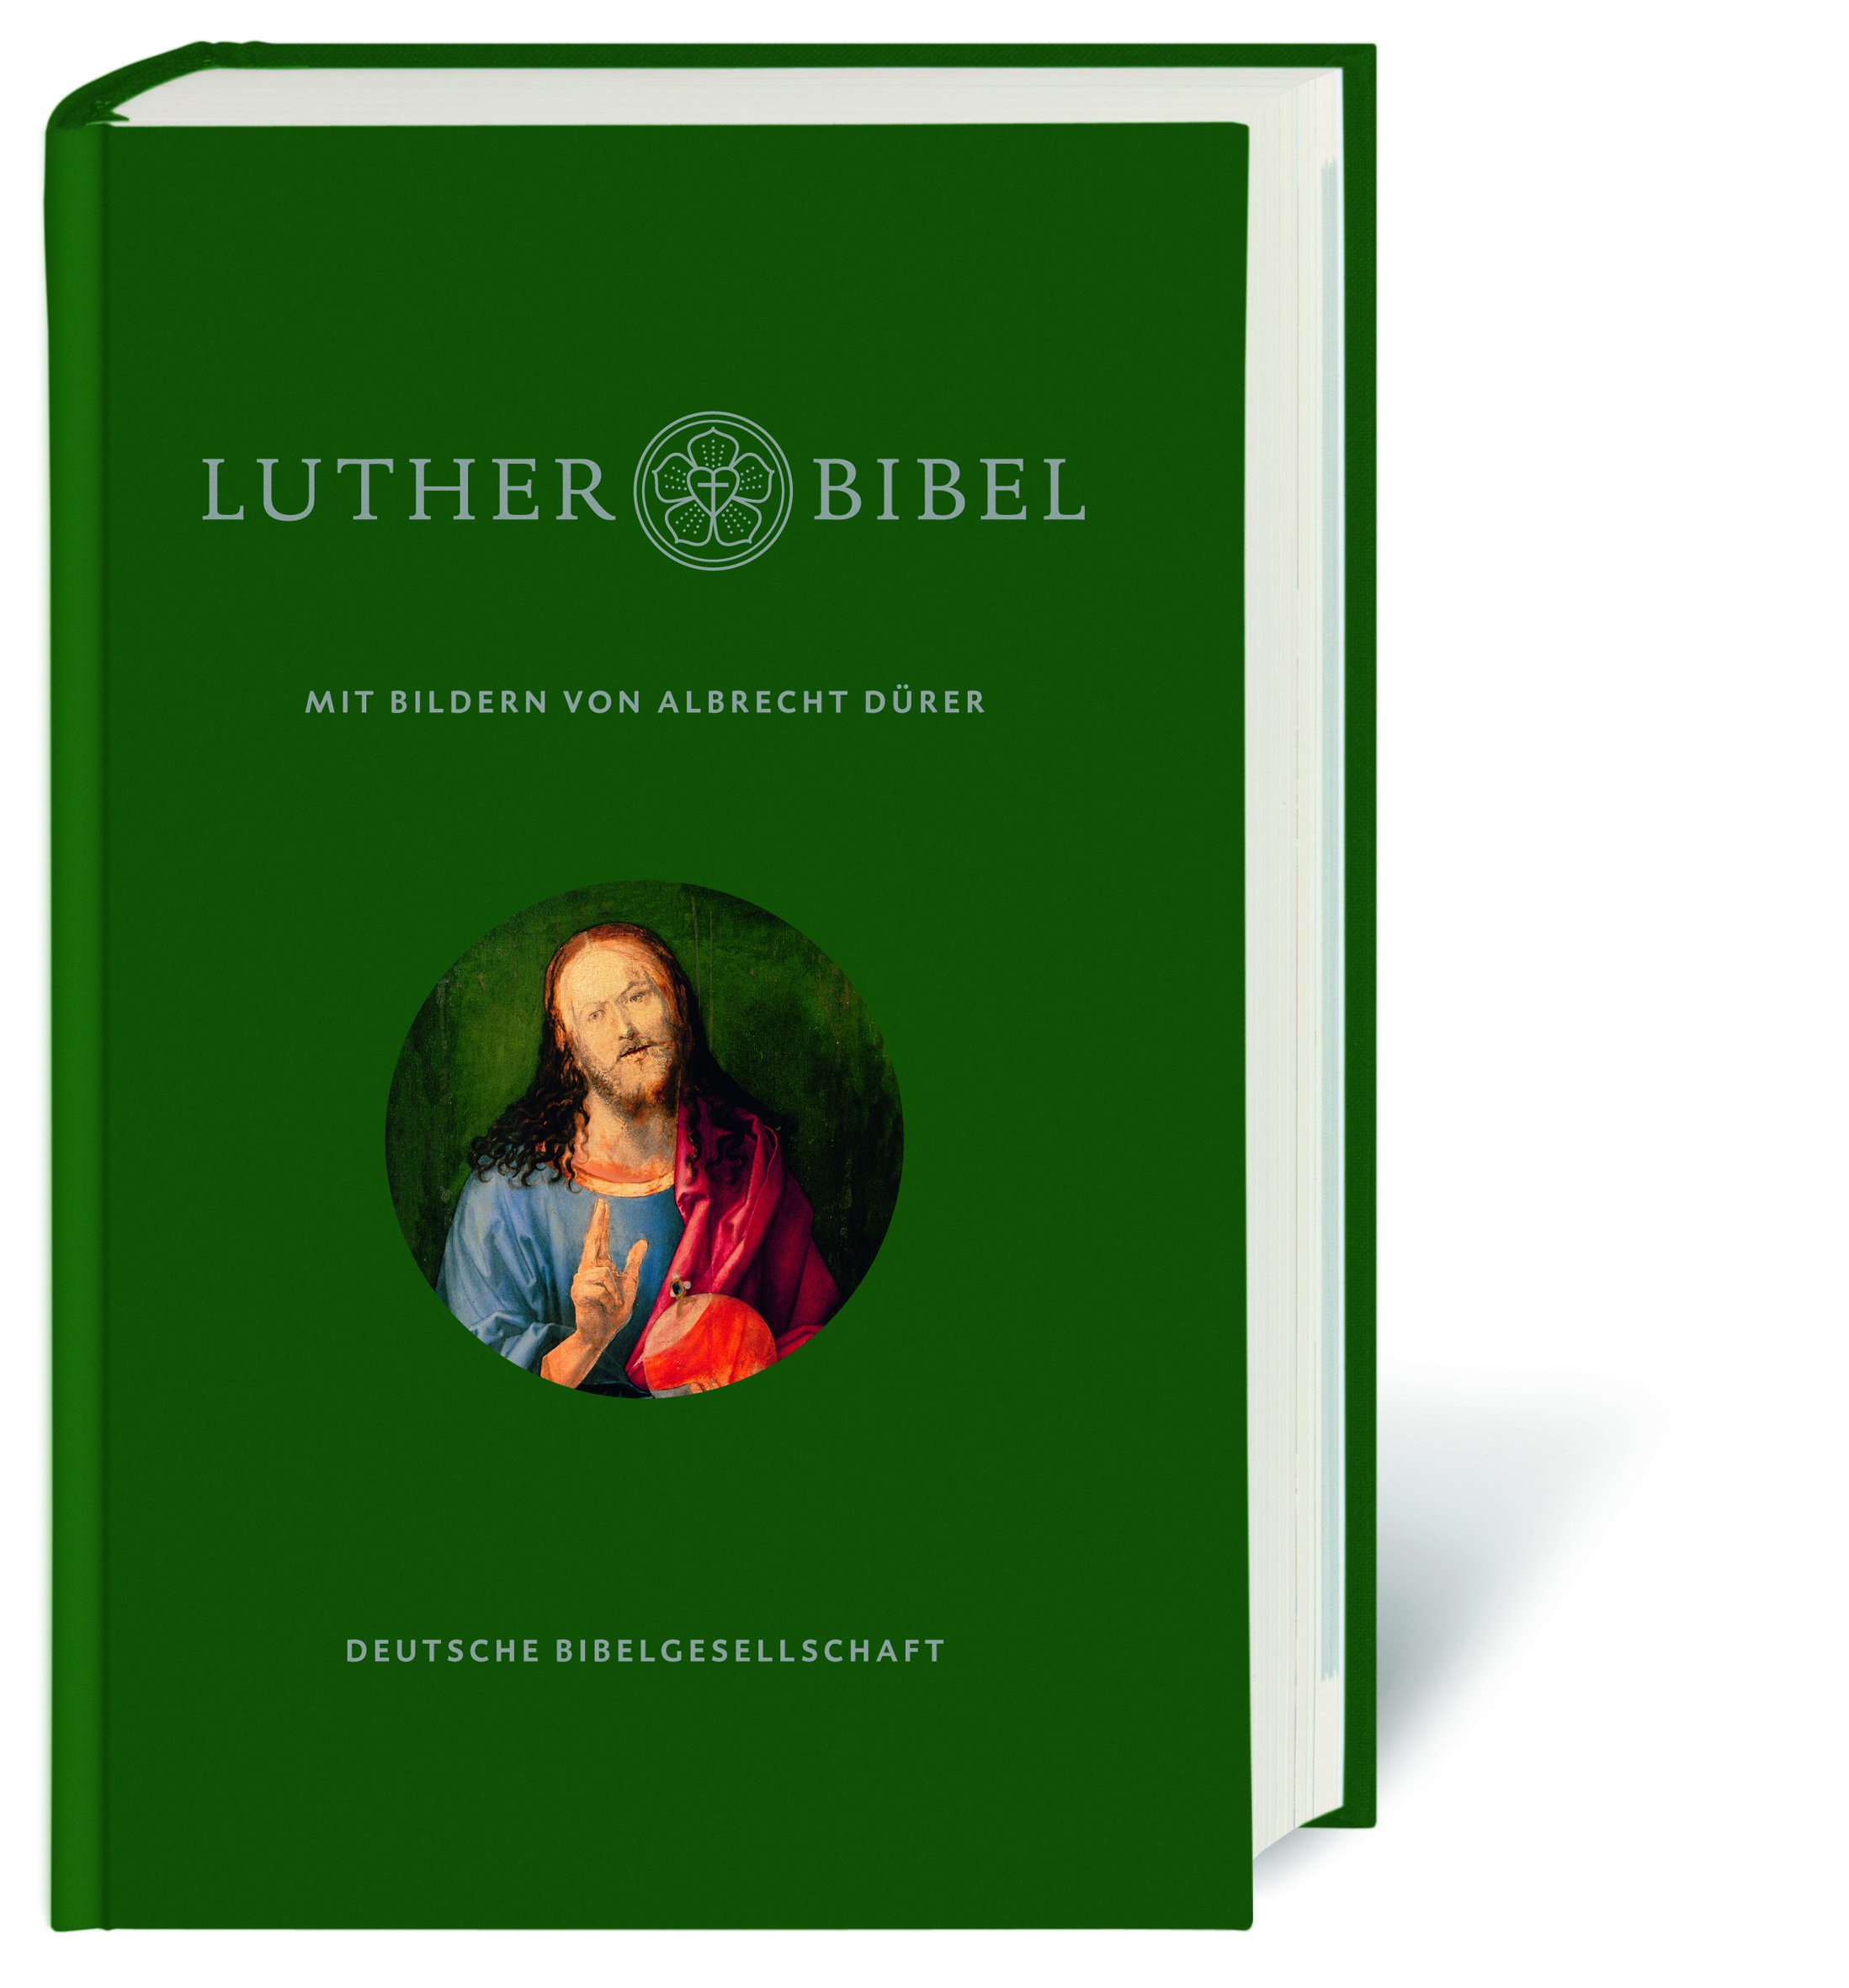 Lutherbibel revidiert - Cover